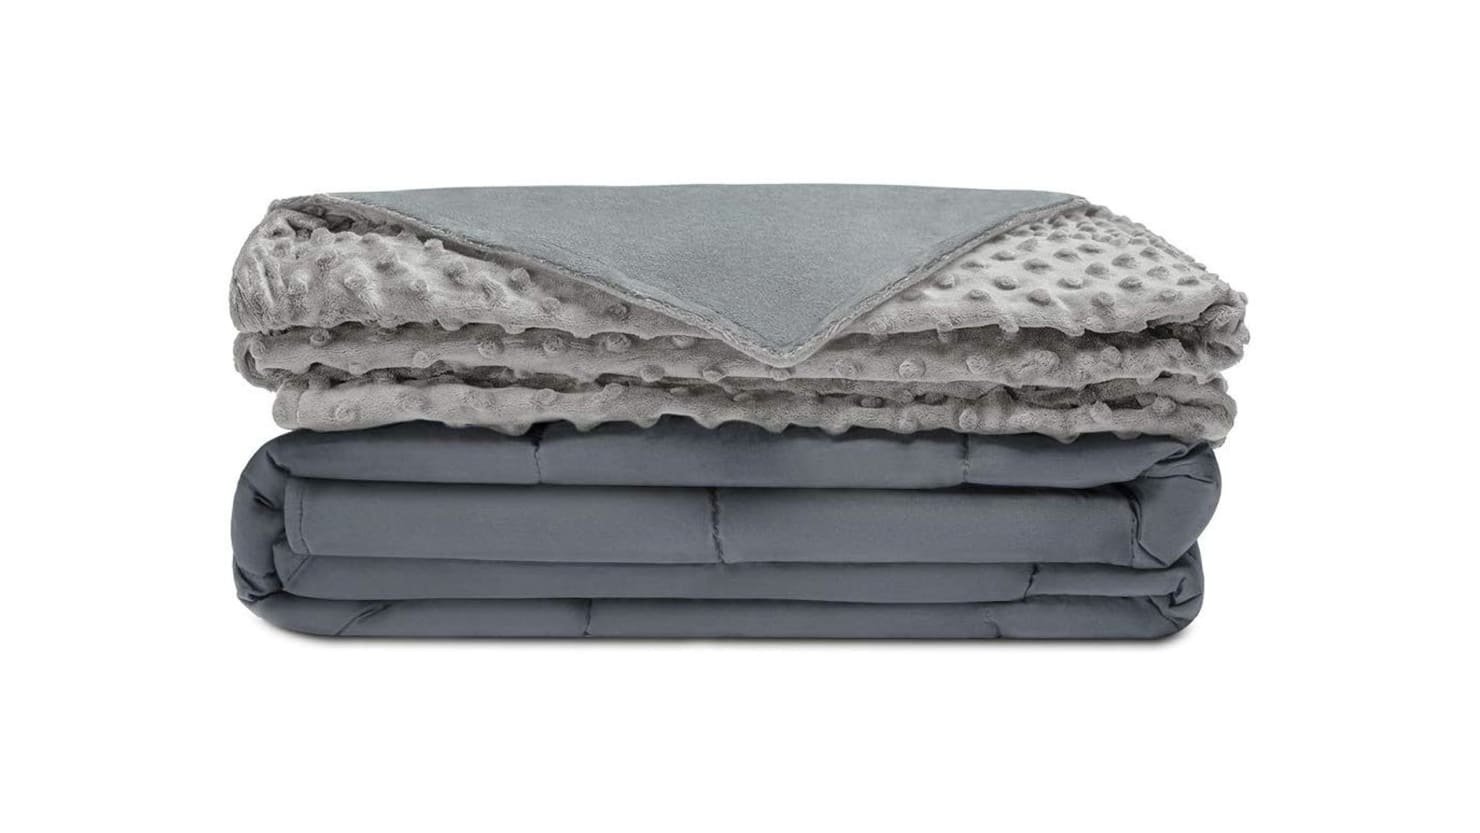 This Top-Rated Weighted Blanket Is a Great Last-Minute Gift